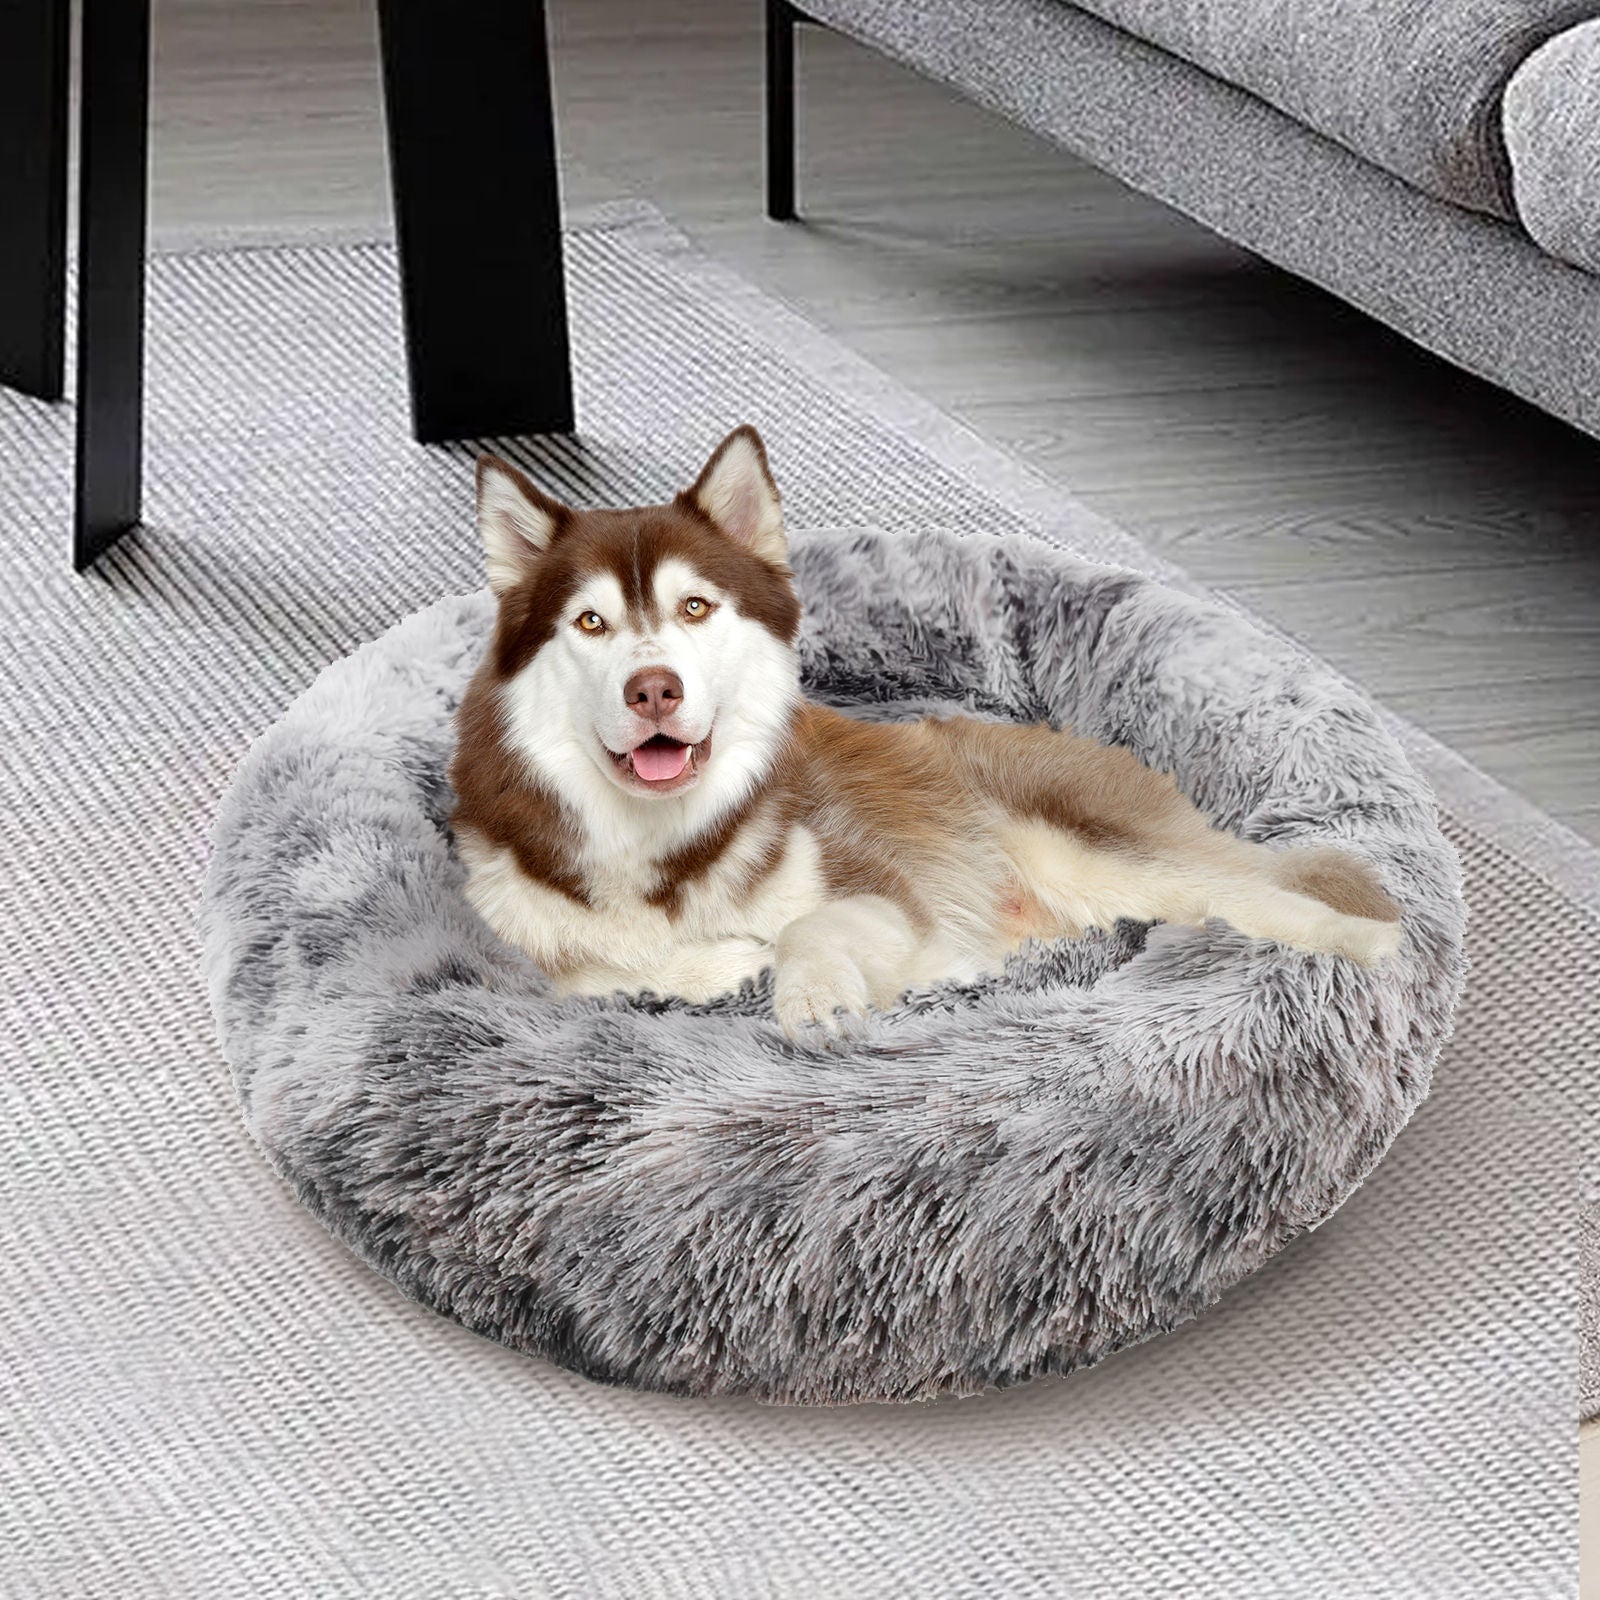 Pawfriends Pet Dog Cat Calming Bed Warm Soft Plush Sleeping Kennel Removable Washable 120cm